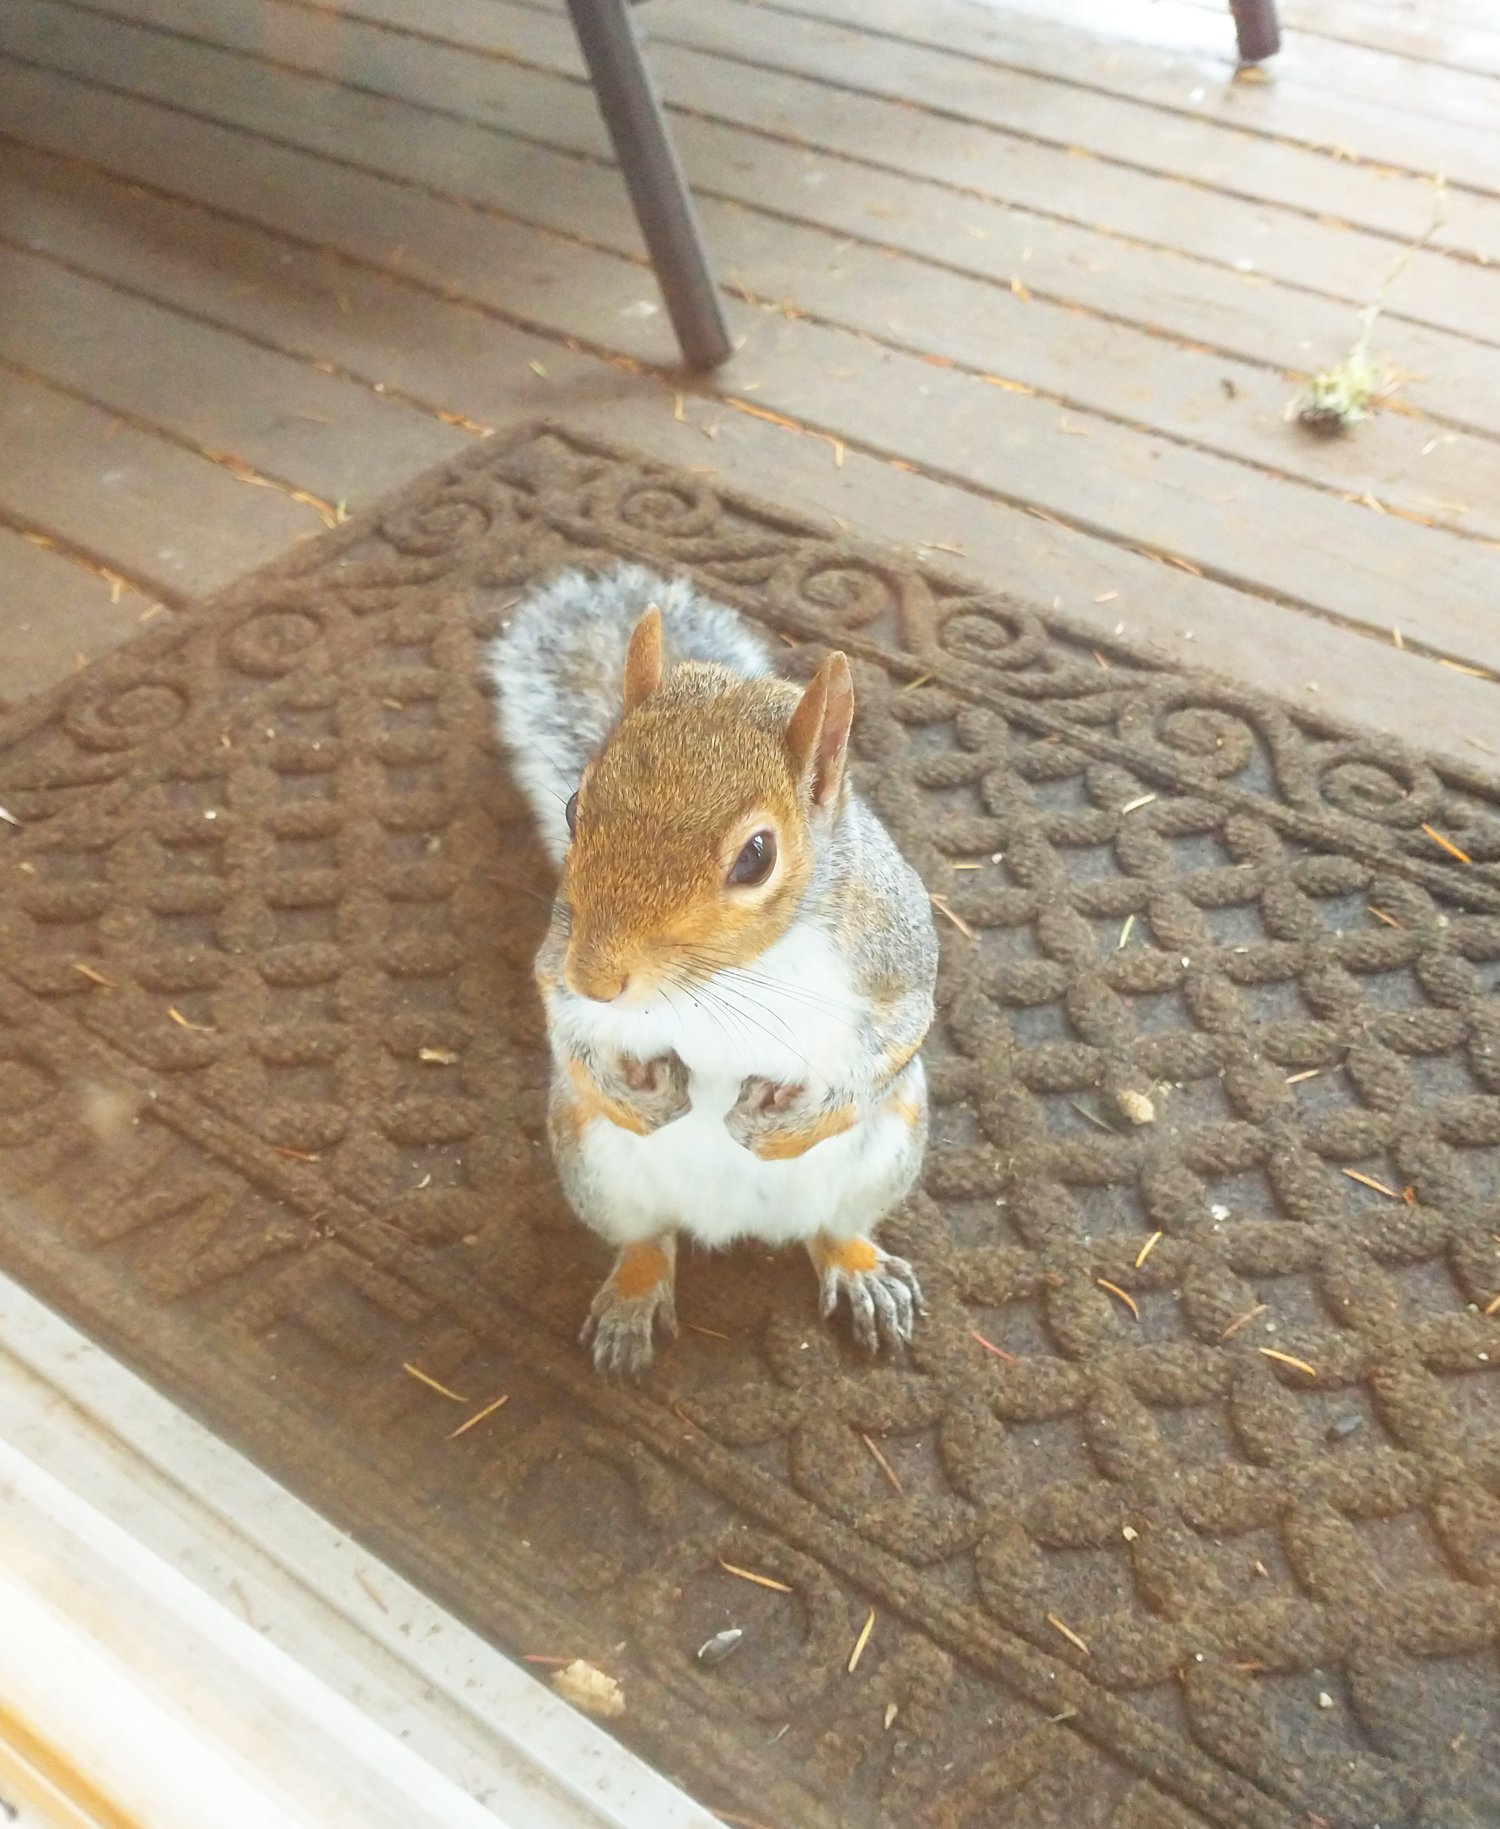 Starting in Shelton, WA. My friend there has become king of Squirrels.